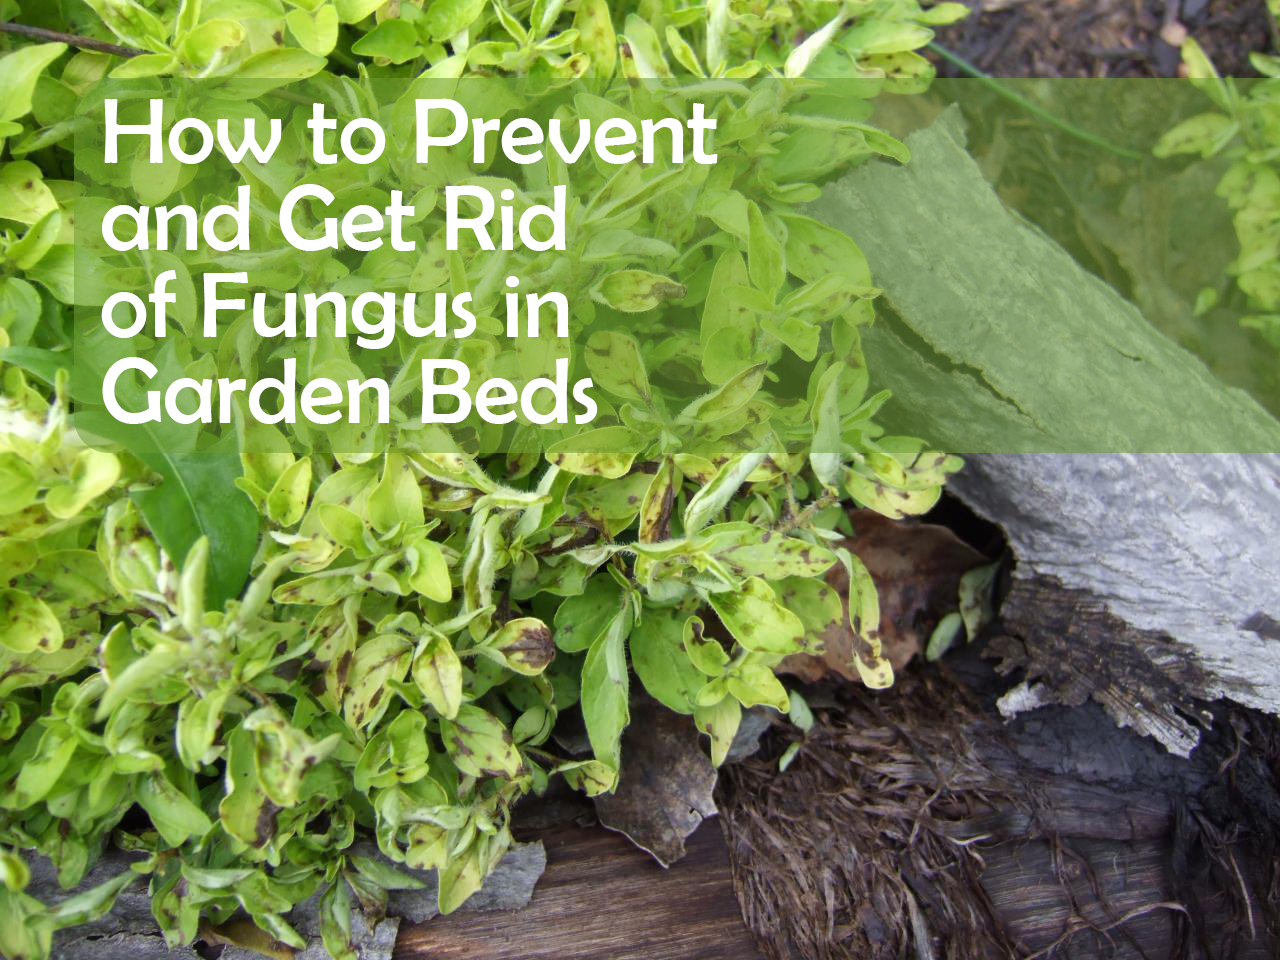 How to Prevent and Get Rid of Fungus in Garden Beds